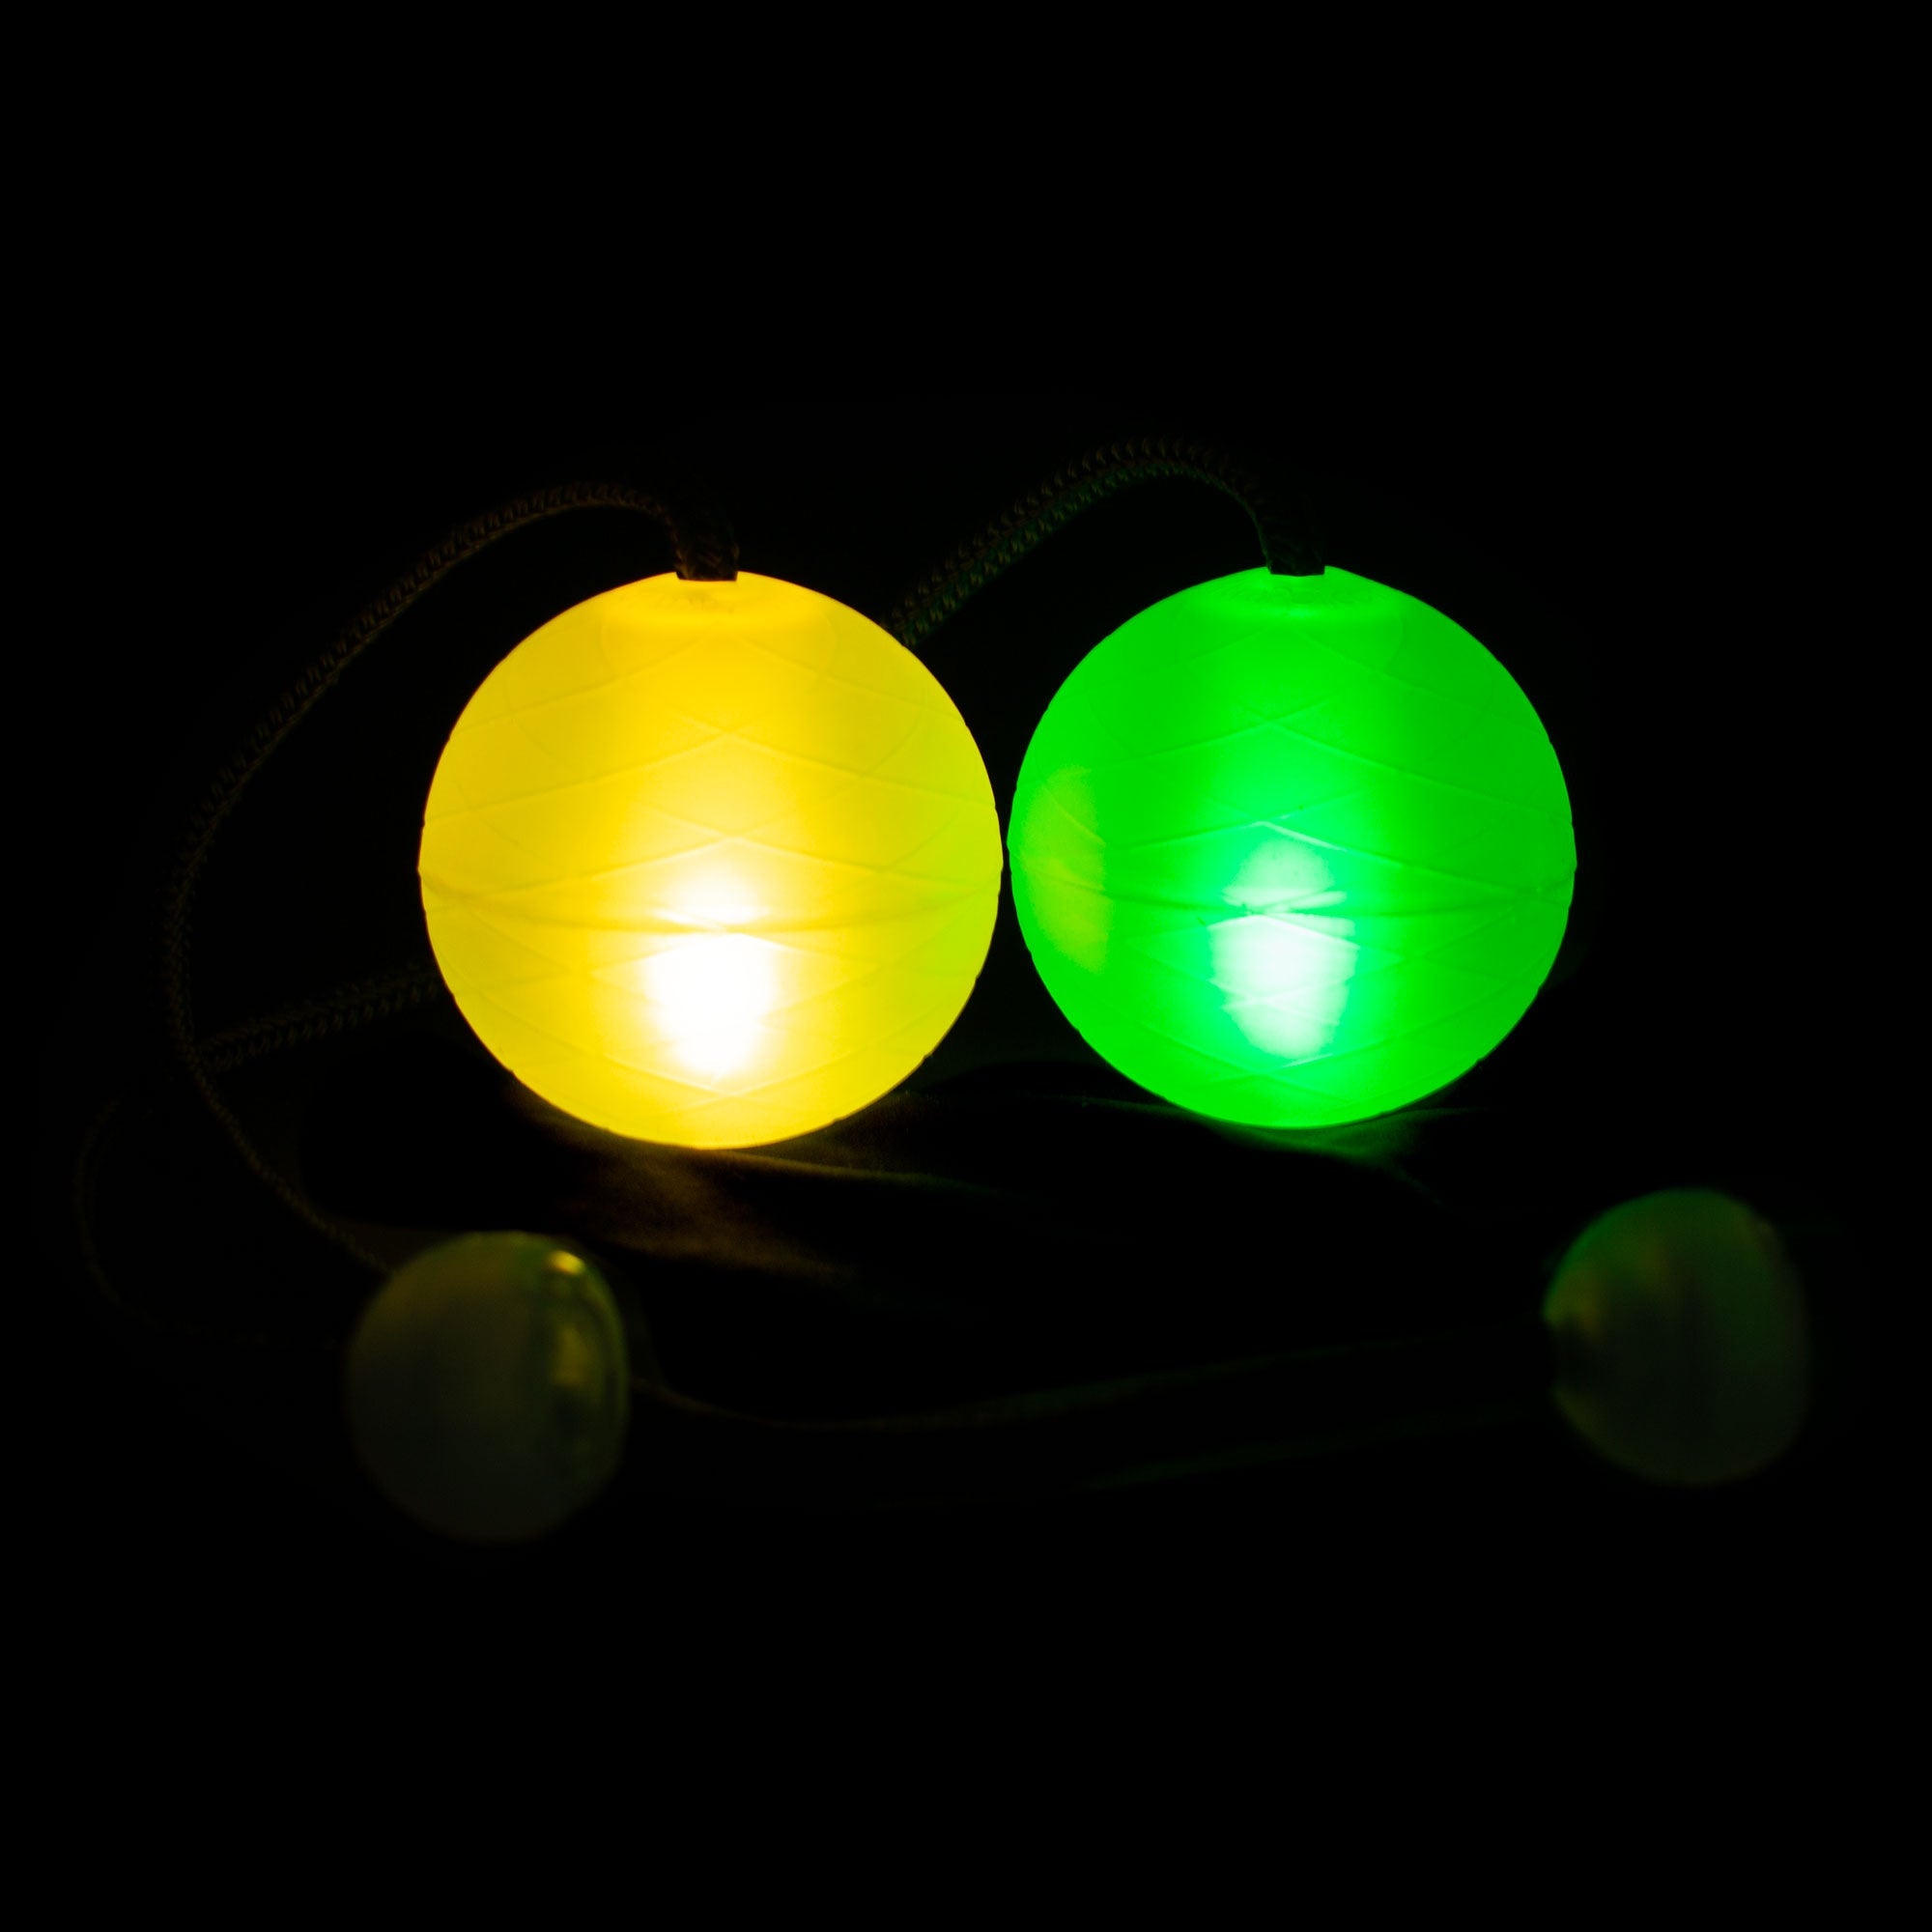 one orbpoi glowing yellow and one green